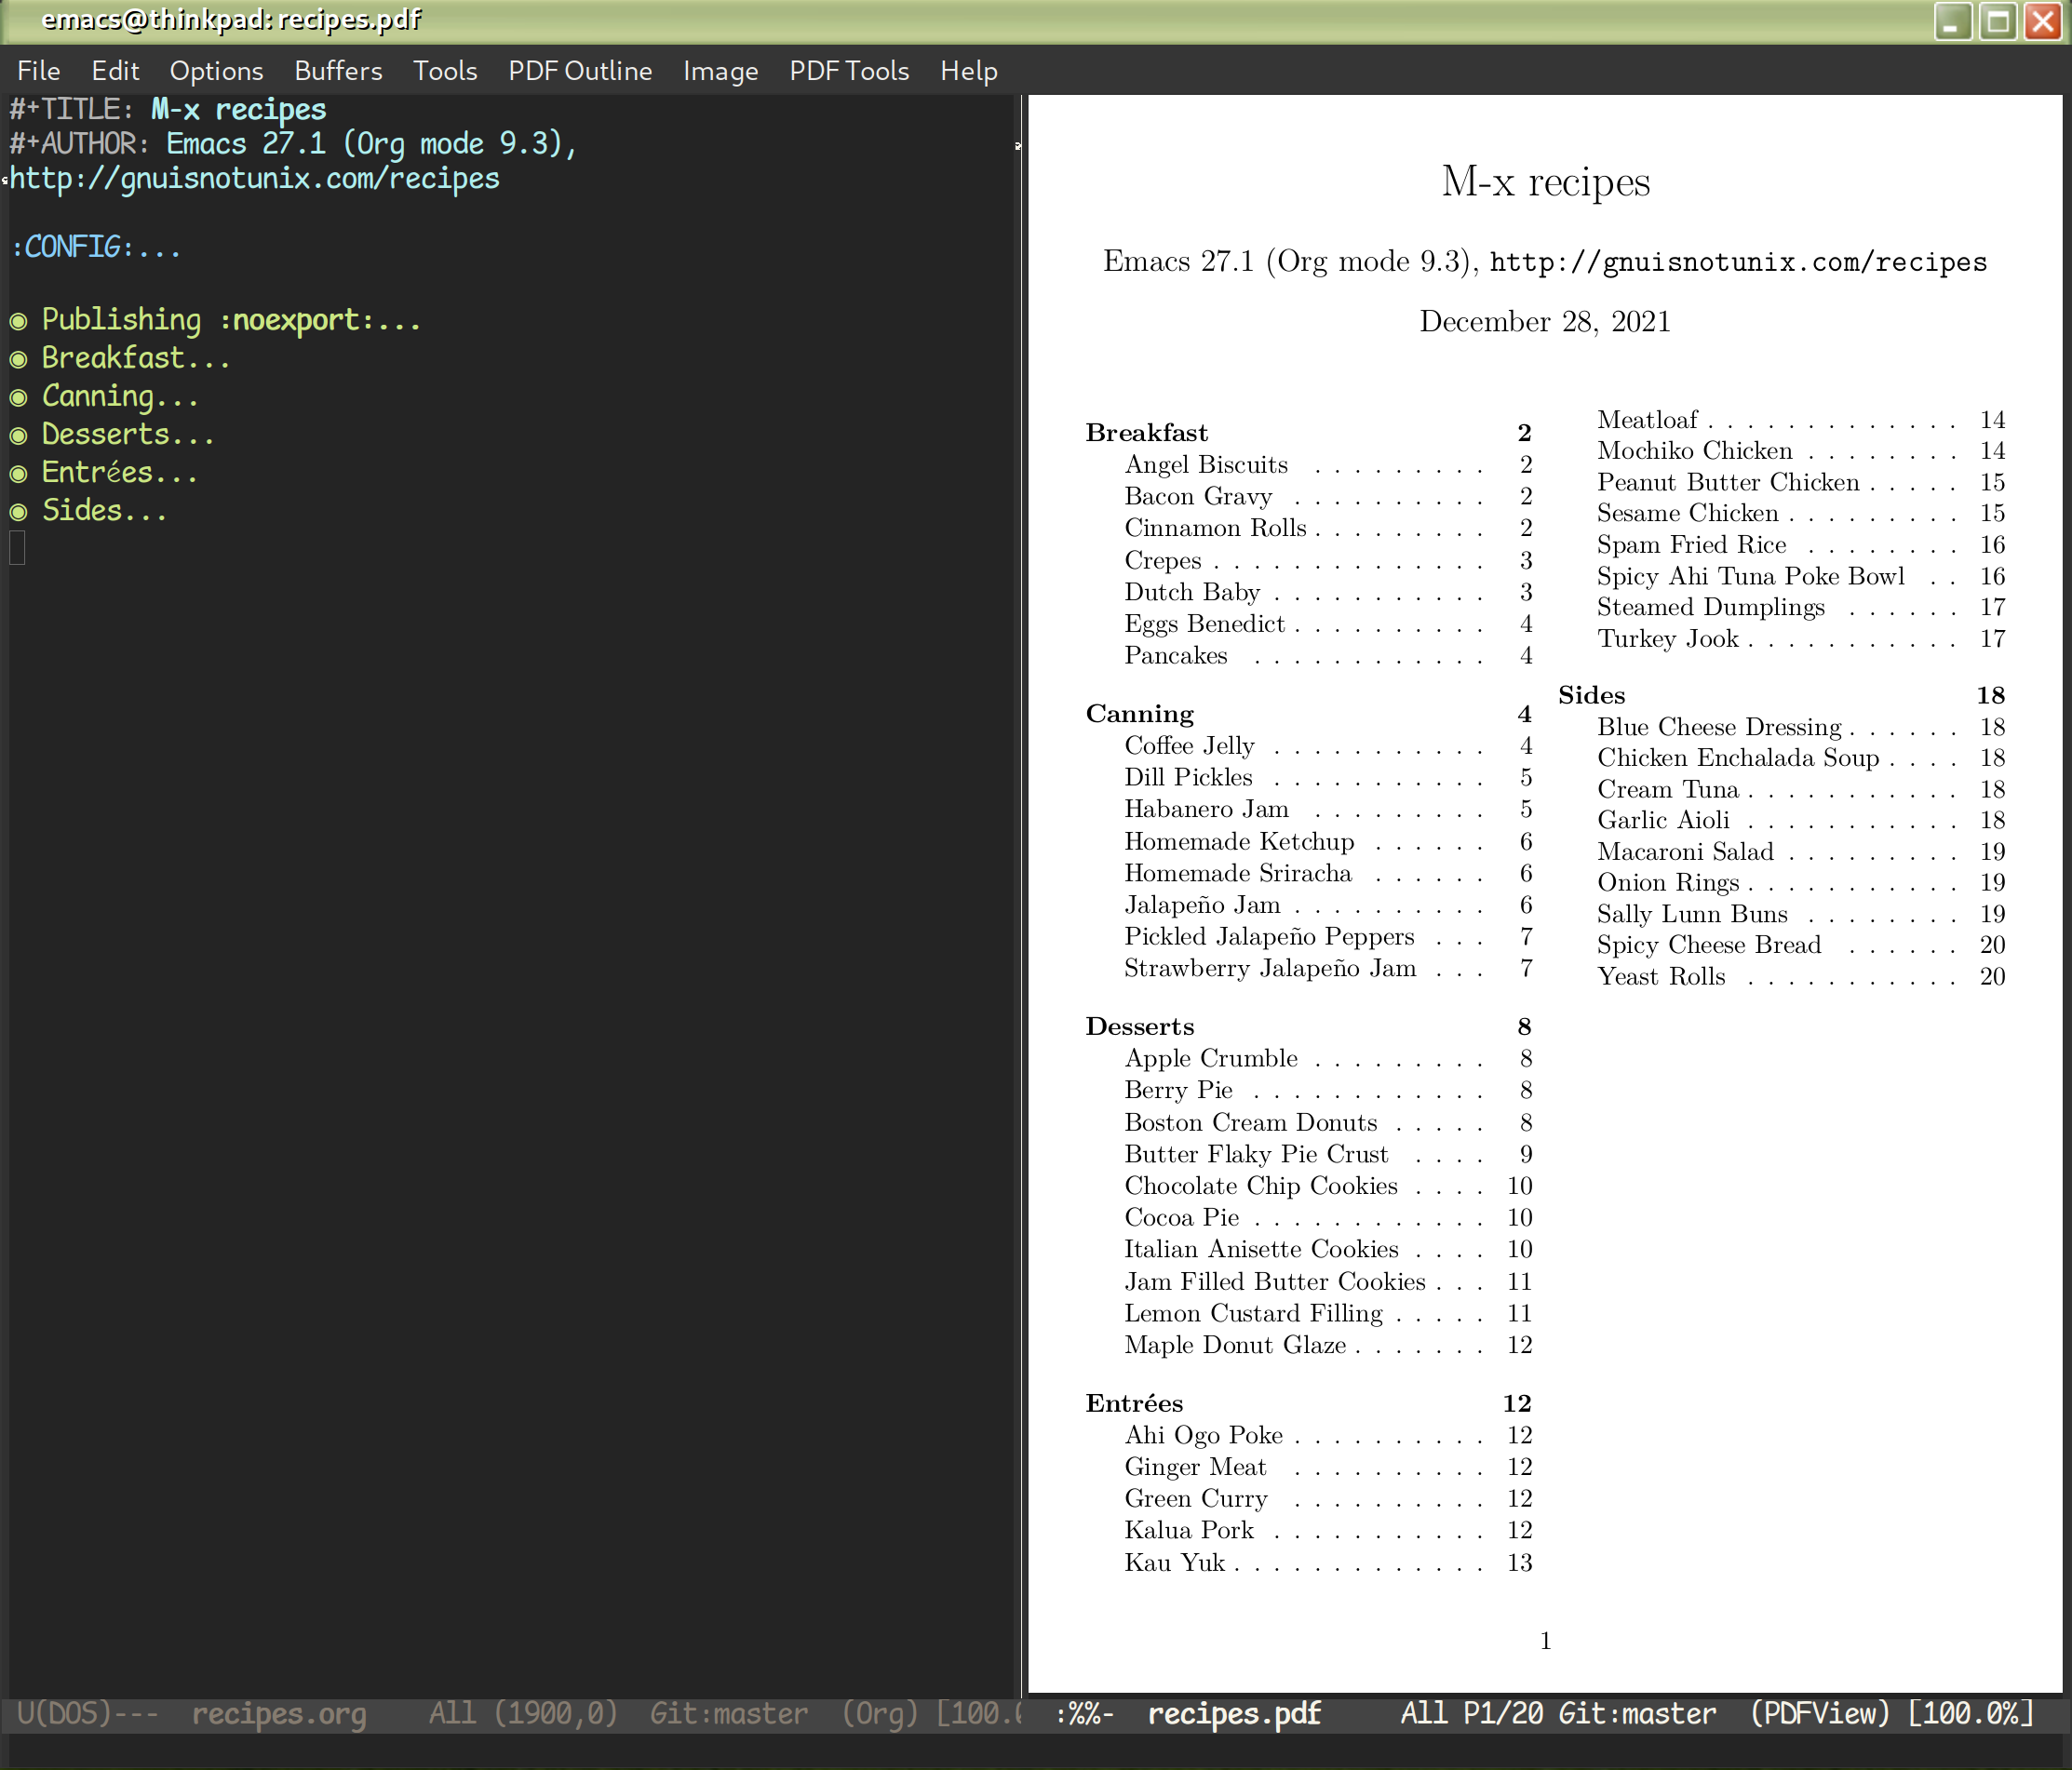 Emacs open and editing my cookbook in org mode.